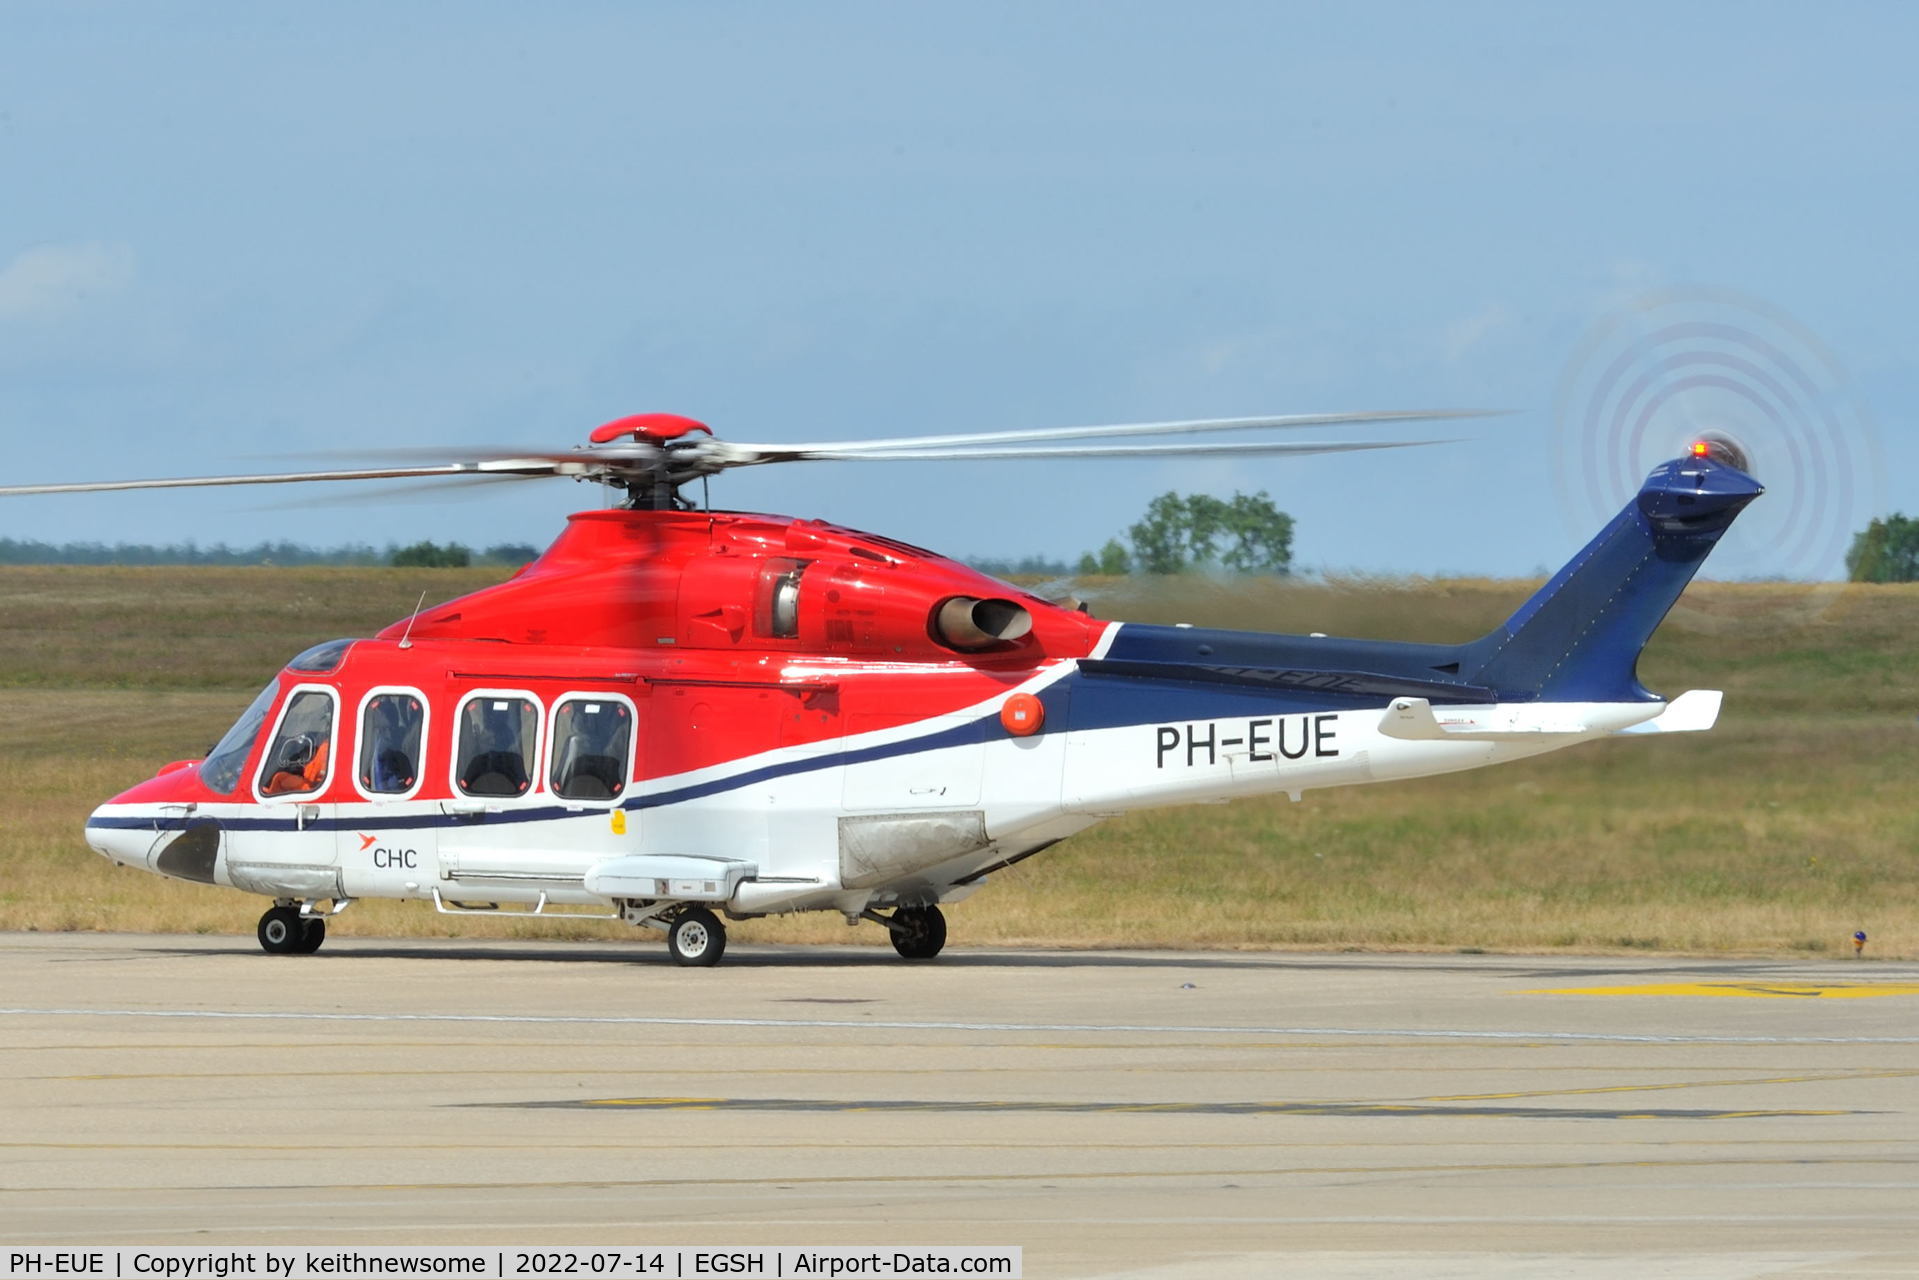 PH-EUE, 2011 AgustaWestland AW-139 C/N 31387, Arriving at Norwich from Den Helder.